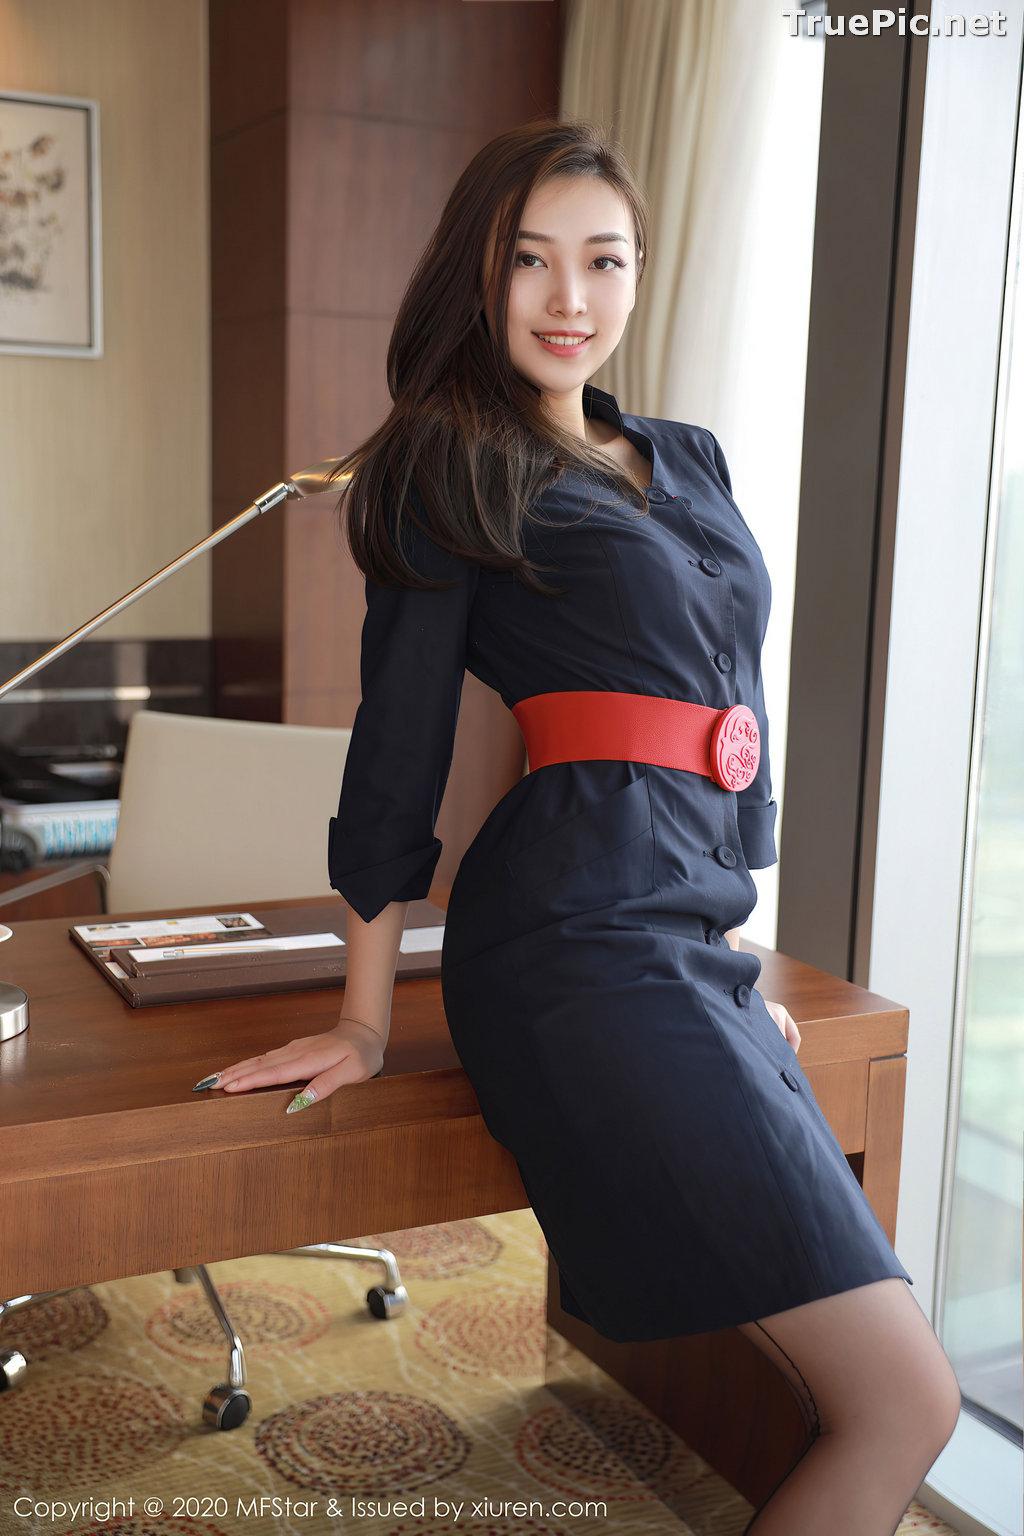 Image MFStar Vol.404 – Chinese Model – Zheng Ying Shan (郑颖姗) – Sexy Office Girl - TruePic.net - Picture-7